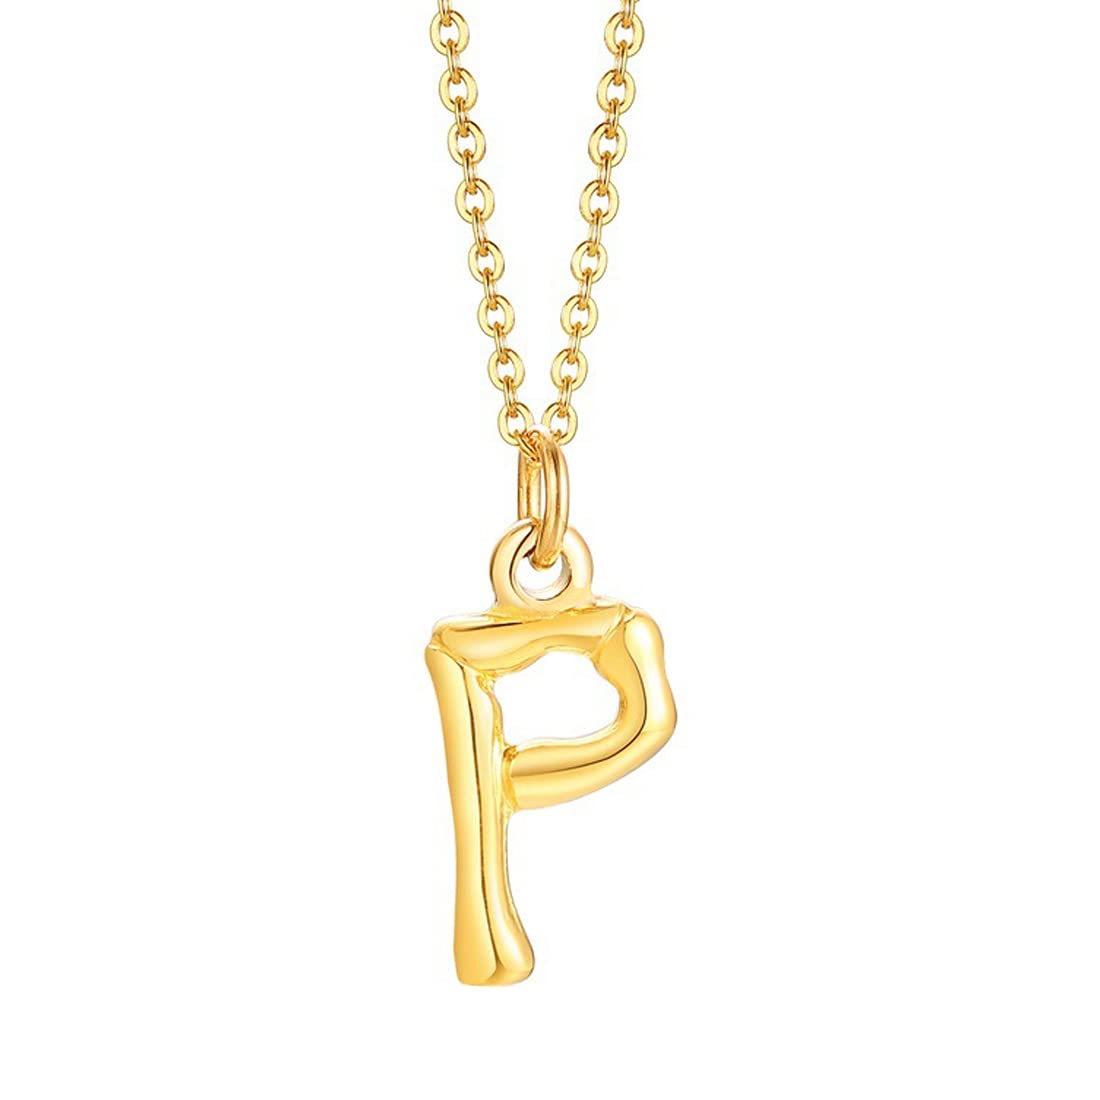 Yellow Chimes Latest Fashion Stainless Steel 18K Gold Plated Initial Pendant with Alphabet P for Women and Girls, Medium (Model: YCFJPD-P363INI-GL)